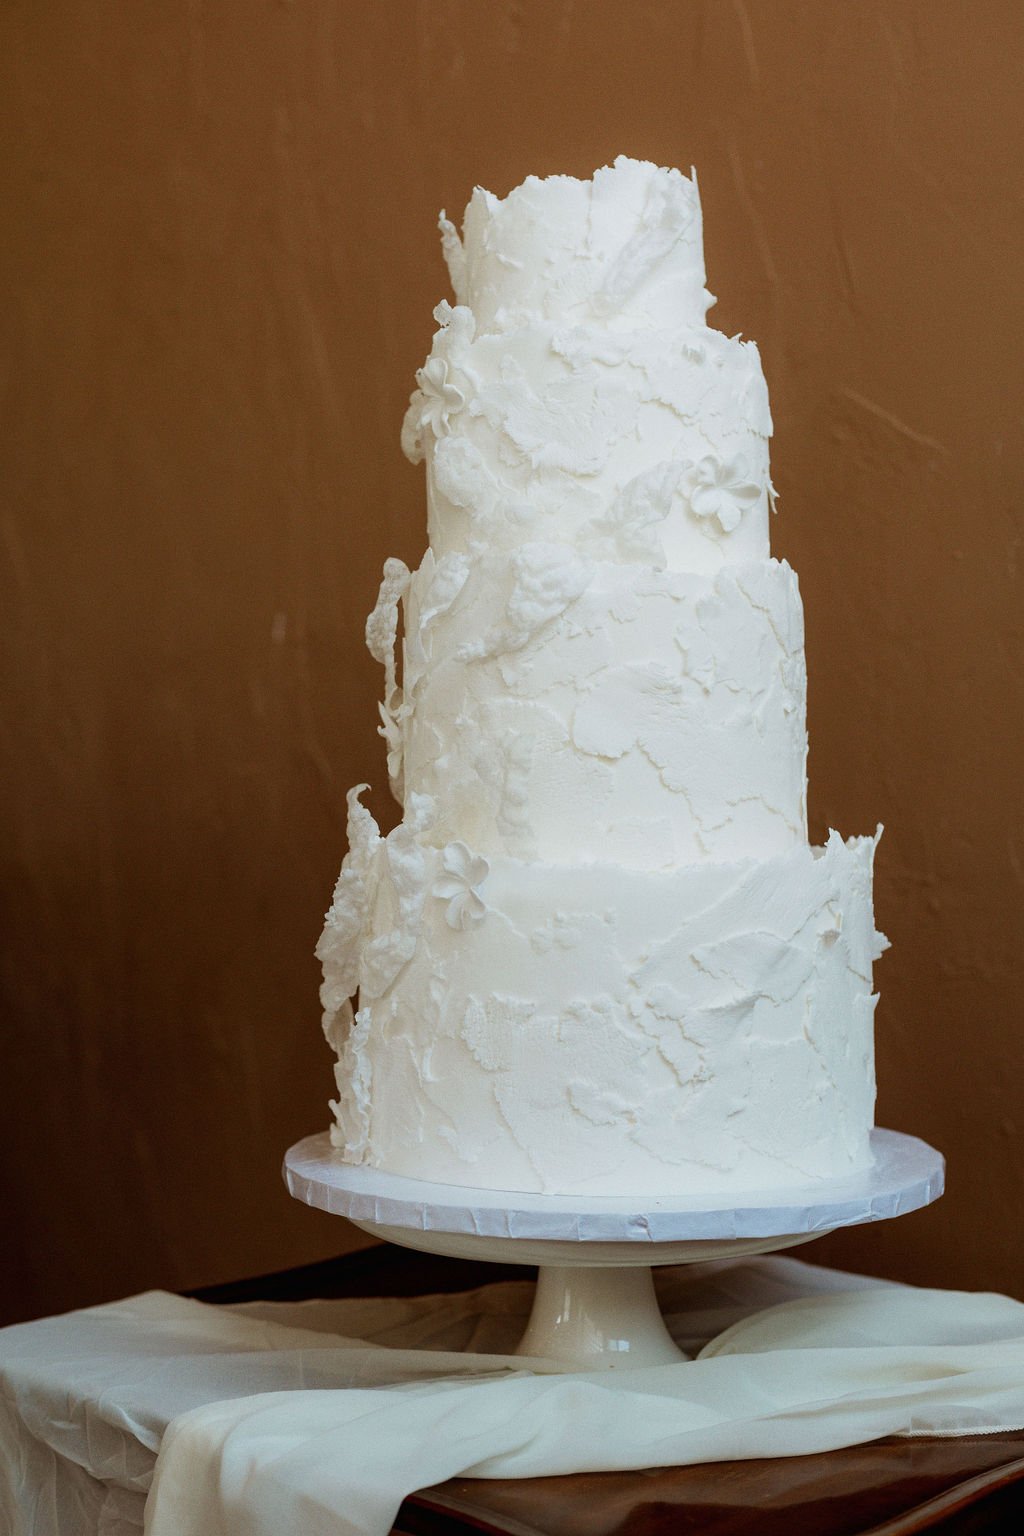 3-tier wedding cake for modern wedding, cake has added texture for visual effect